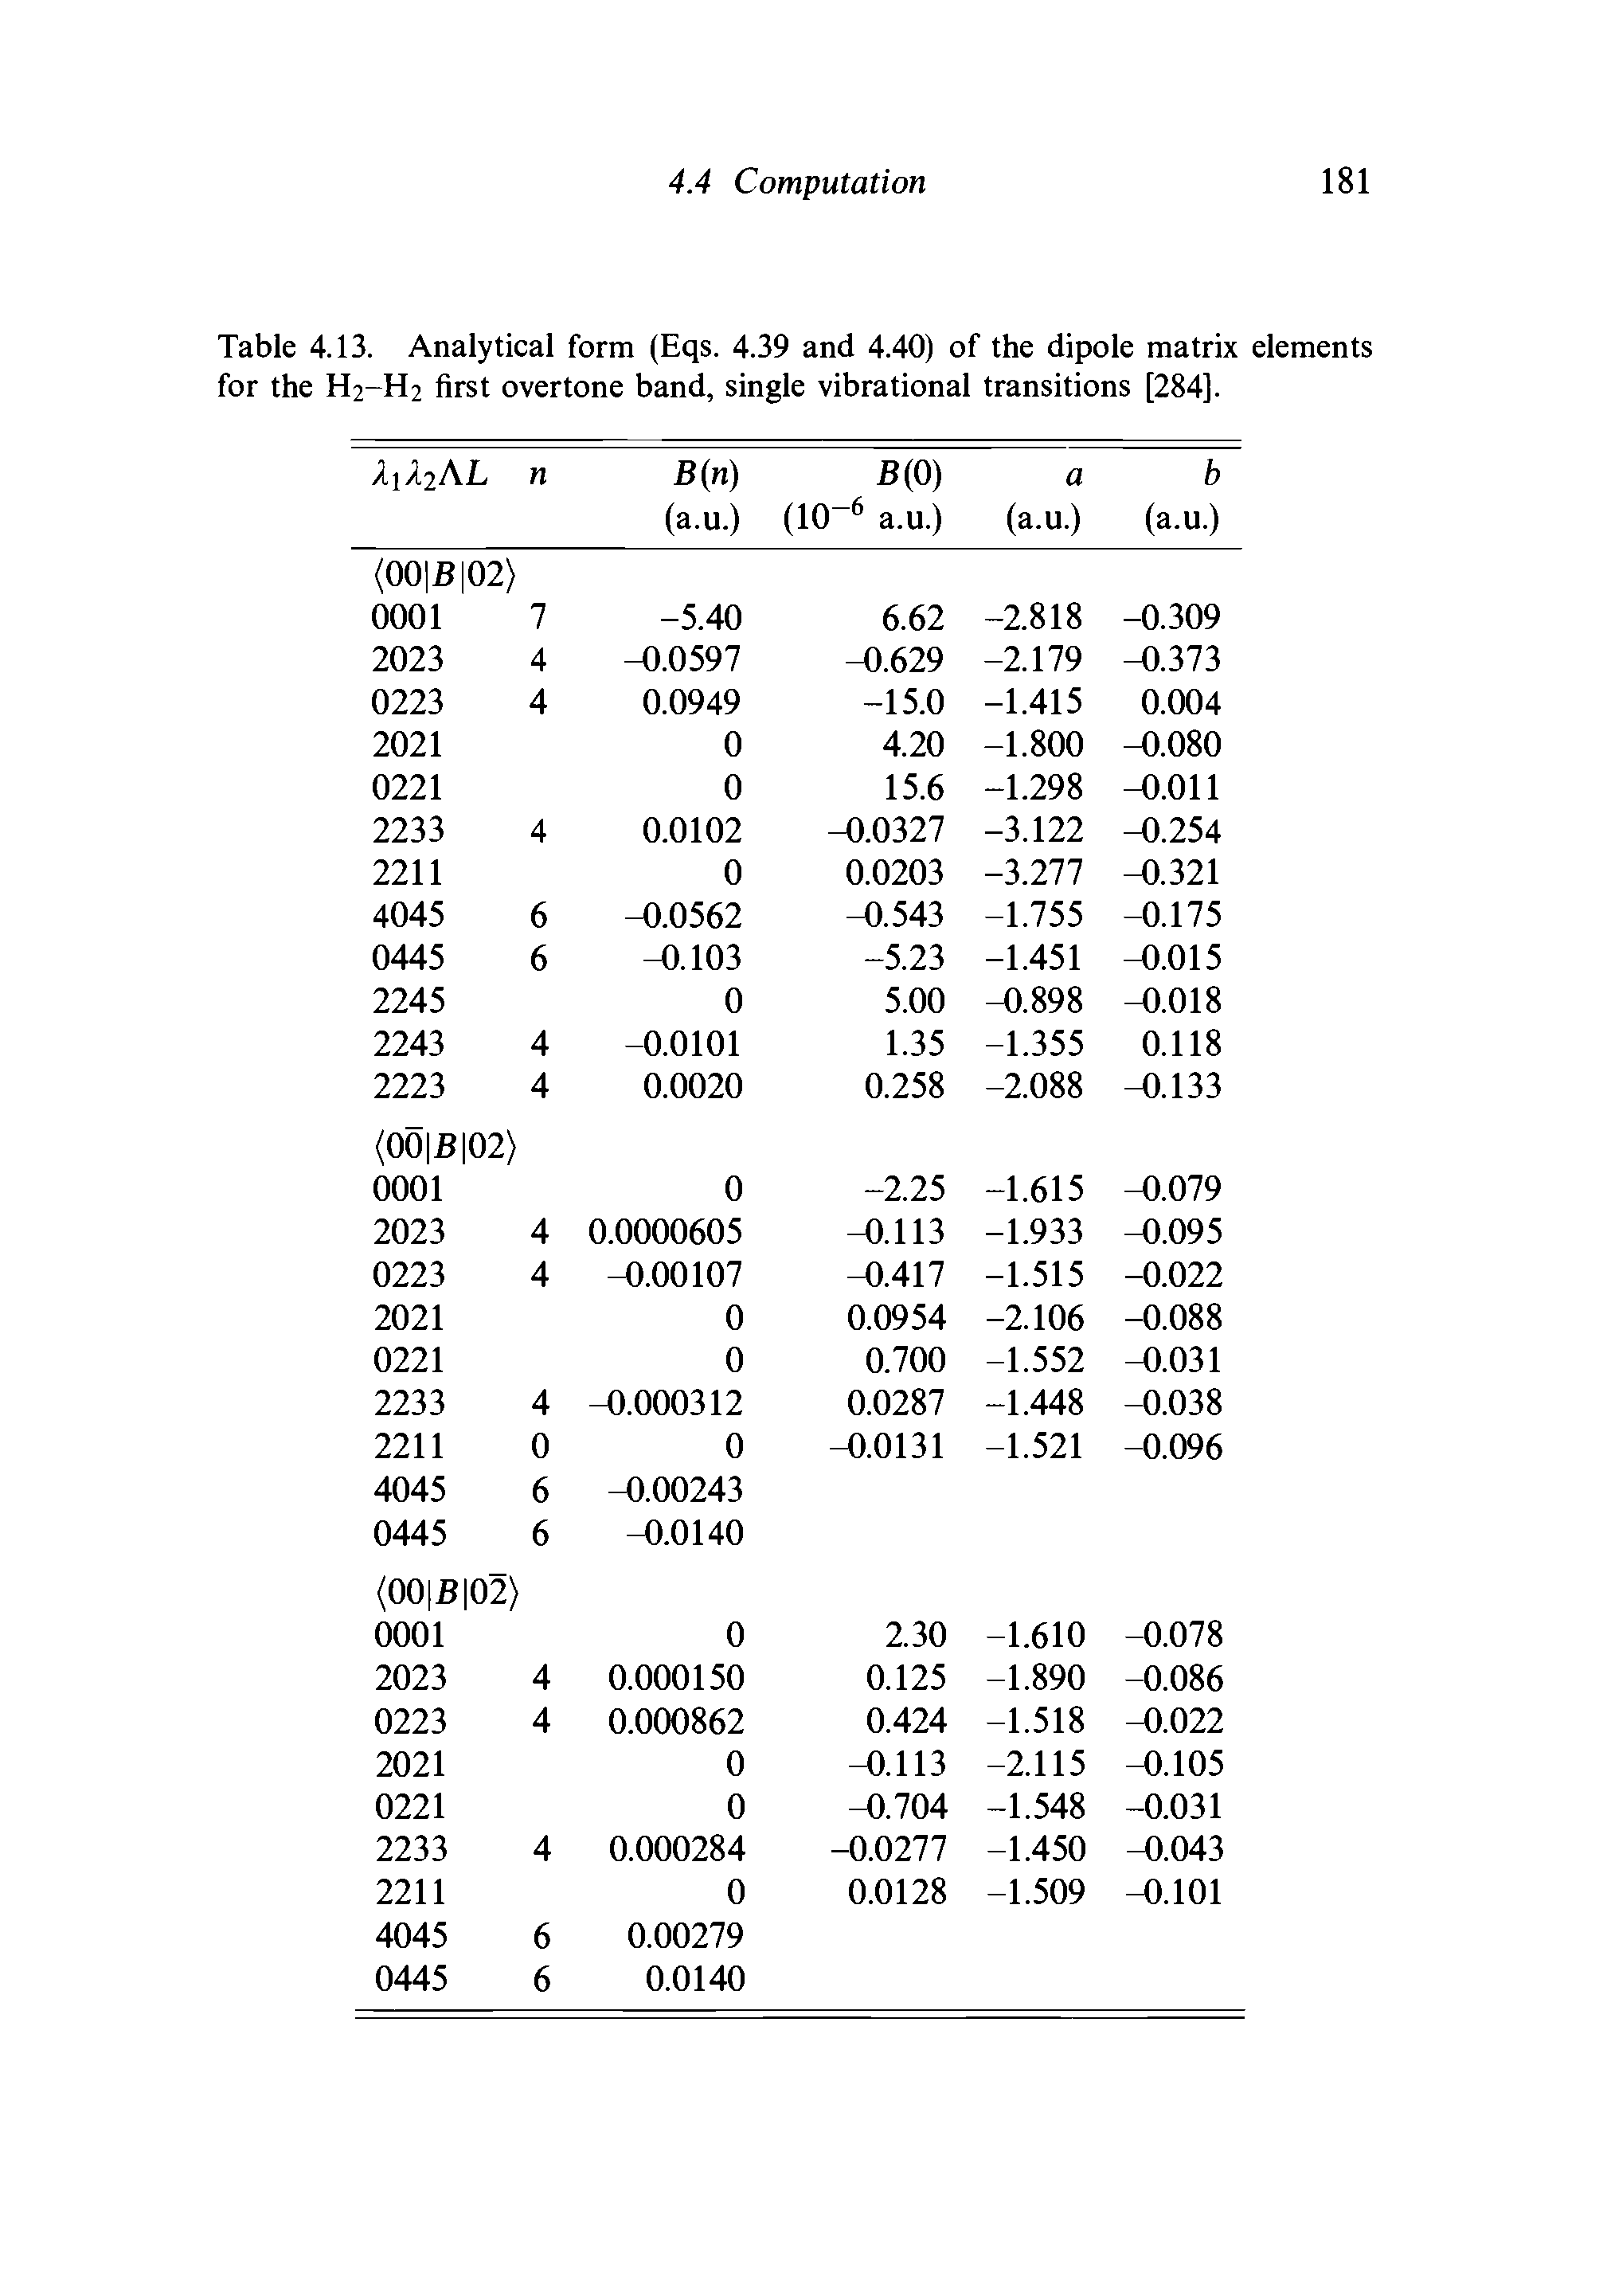 Table 4.13. Analytical form (Eqs. 4.39 and 4.40) of the dipole matrix elements for the H2-H2 first overtone band, single vibrational transitions [284].